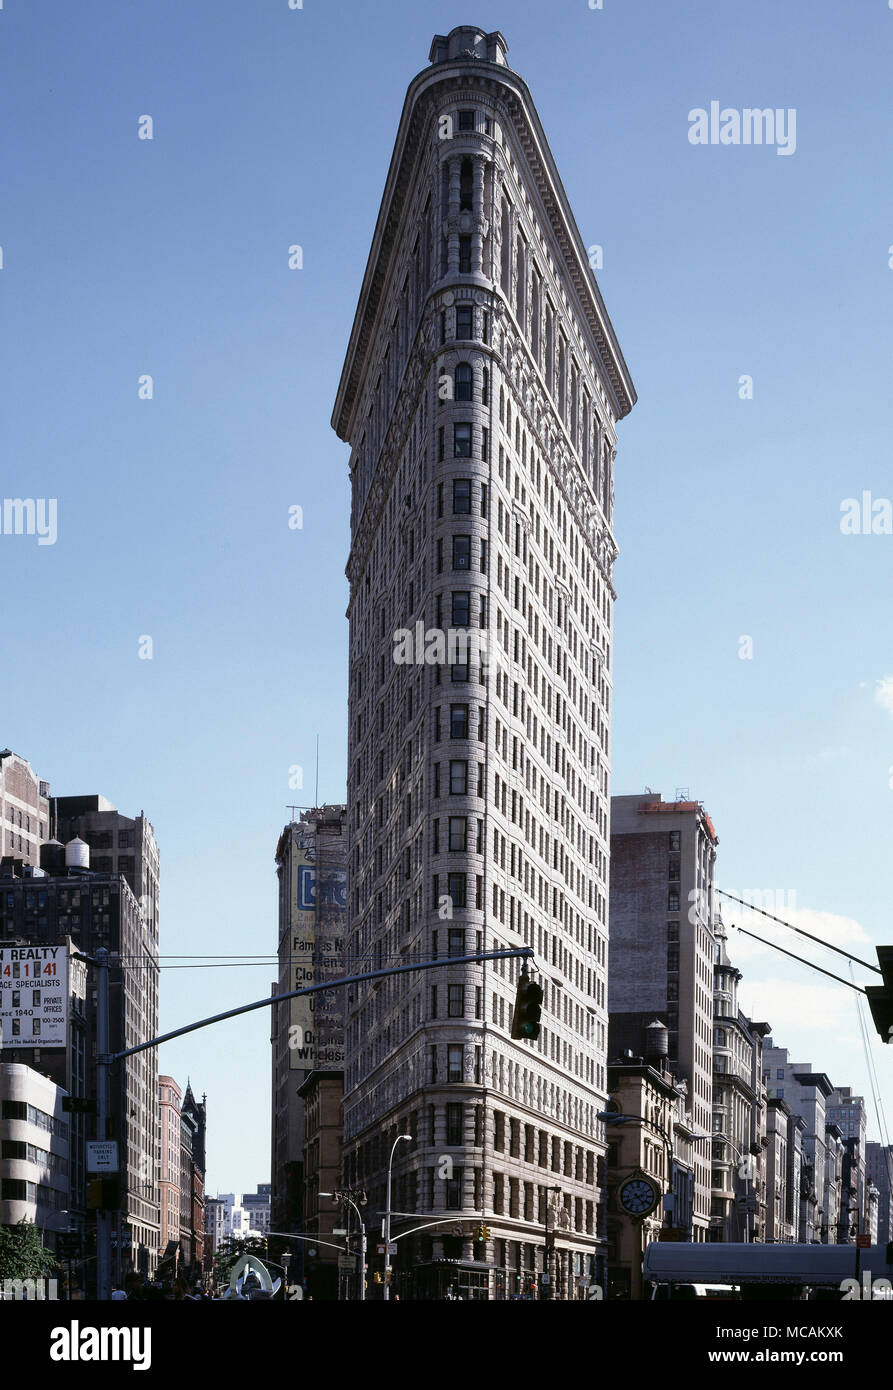 The Flatiron Building, originally the Fuller Building, is located at 175 Fifth Avenue in the borough of Manhattan, New York City, and is considered to be a groundbreaking skyscraper. Upon completion in 1902, it was one of the tallest buildings in the city and one of only two skyscrapers north of 14th Street ? the other being the Metropolitan Life Insurance Company Tower, one block east. The building sits on a triangular island-block formed by Fifth Avenue, Broadway and East 22nd Street, with 23rd Street grazing the triangle's northern (uptown) peak. As with numerous other wedge-shaped building Stock Photo